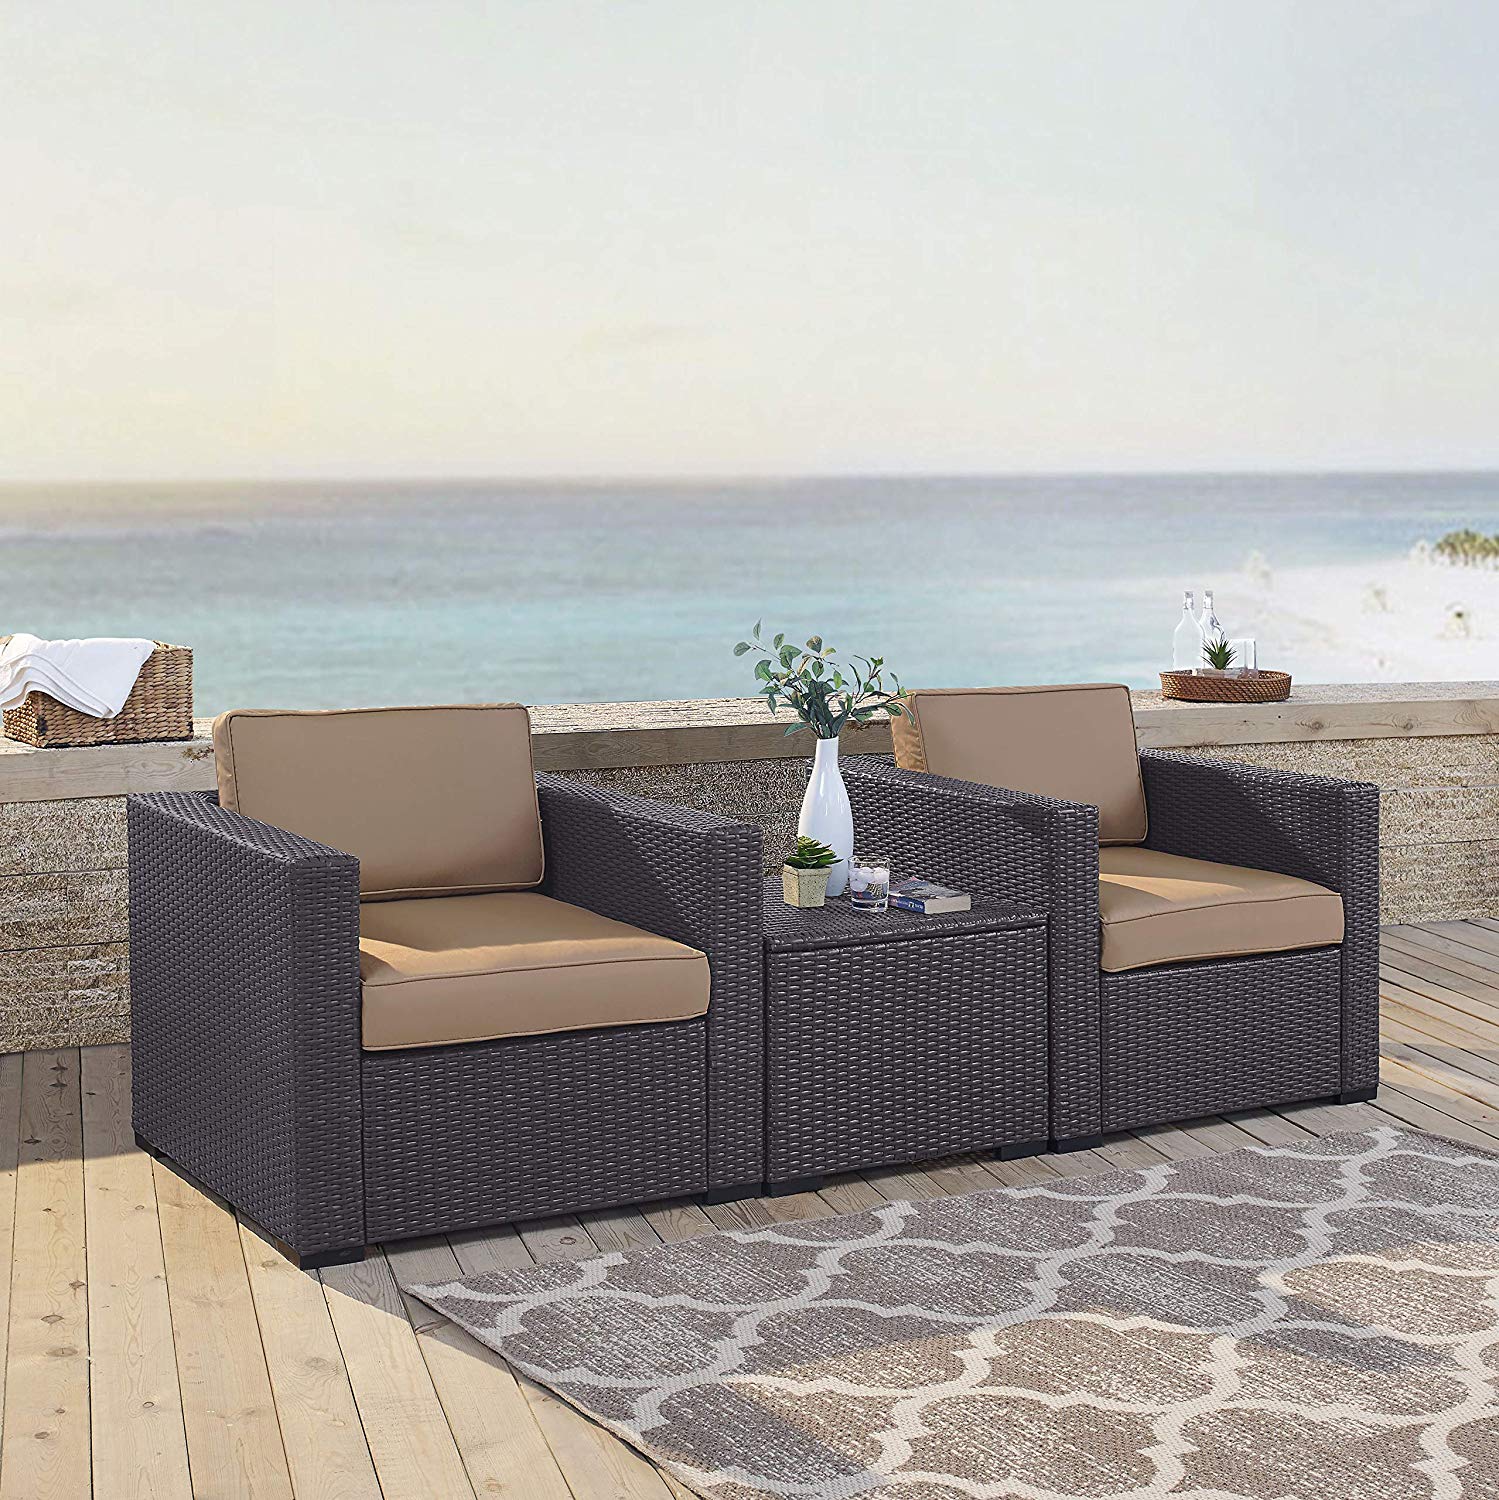 Crosley Furniture Biscayne 3 Piece Fabric Patio Conversation Set in Brown/Mocha - image 4 of 10